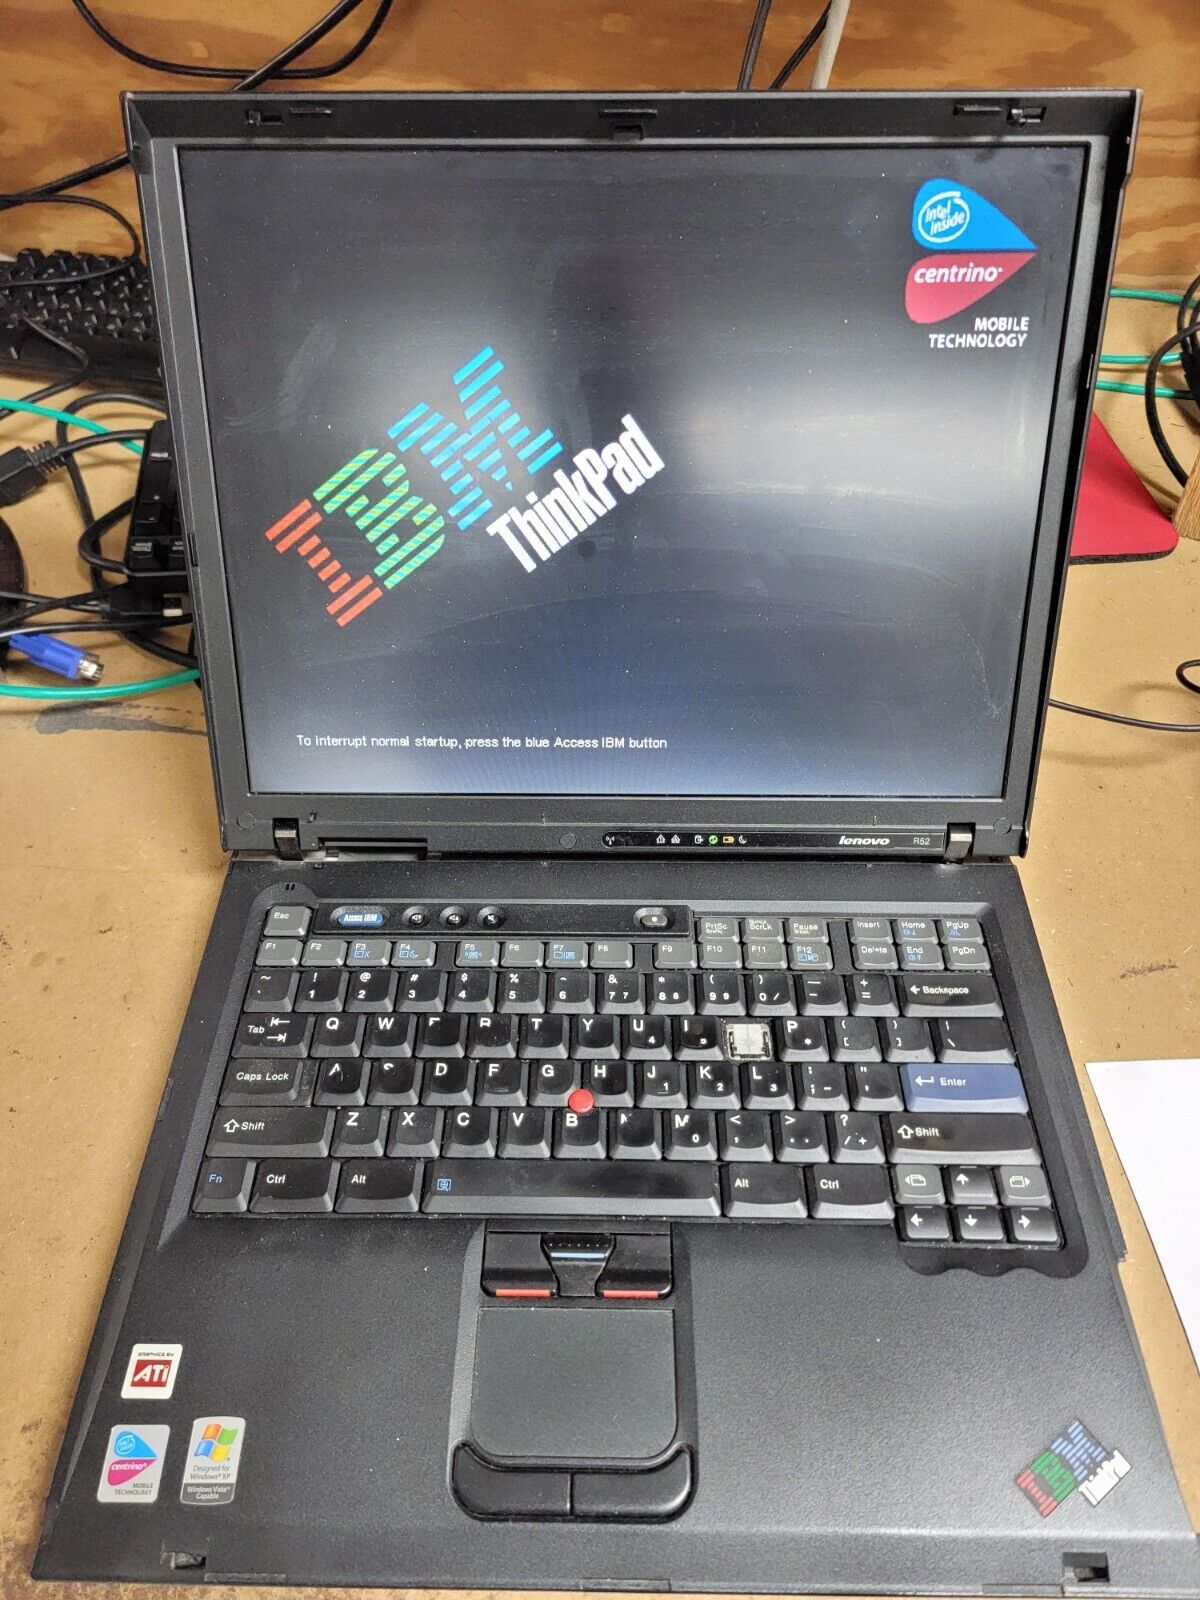 IBM THINKPAD R52 LAPTOP - PARTS ONLY - SEE DESCRIPTION